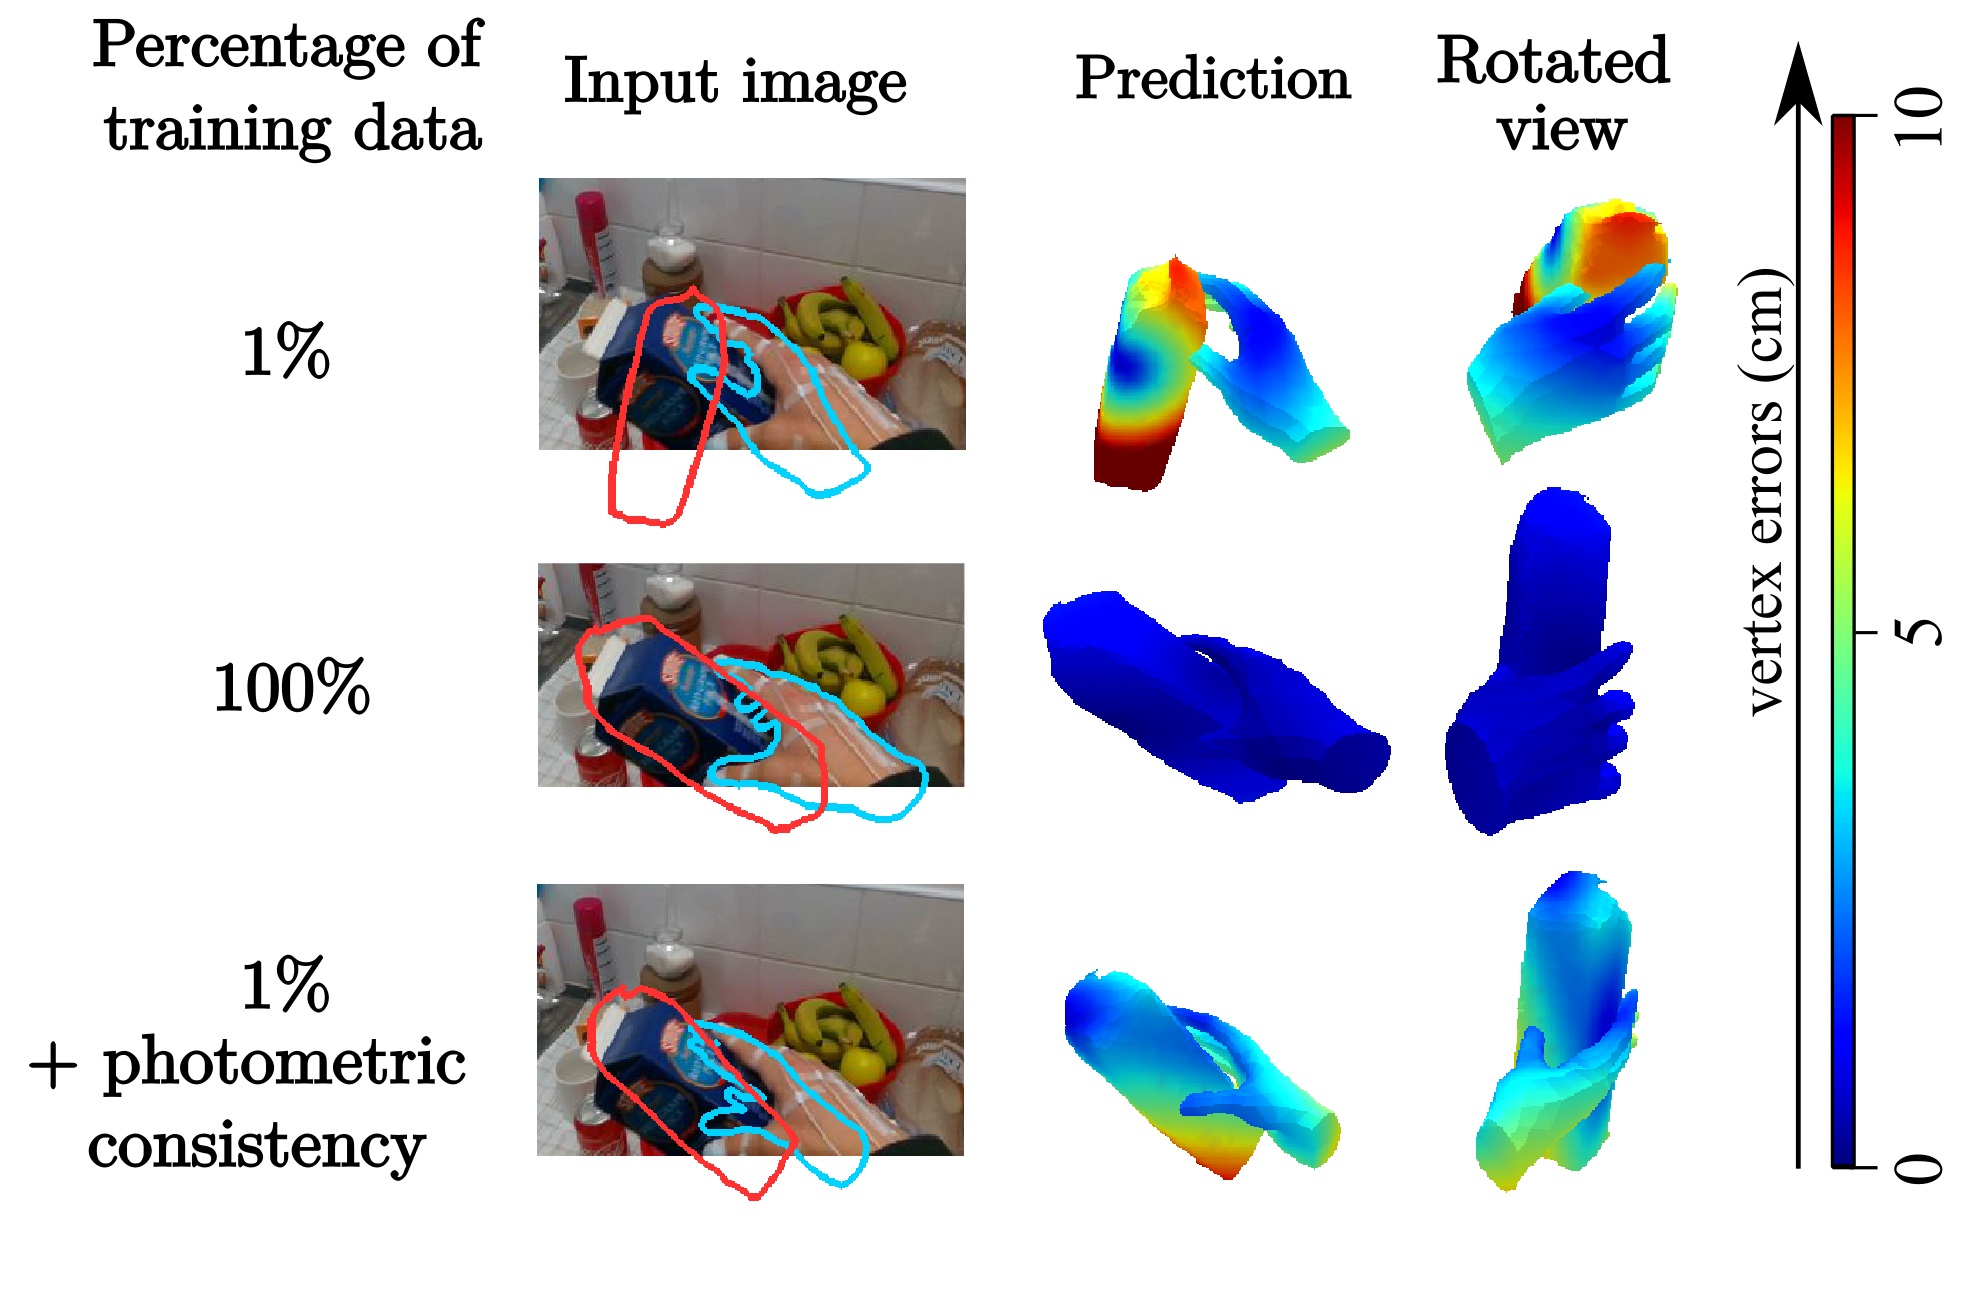 Our method provides accurate 3D hand-object reconstructions from monocular, sparsely annotated RGB videos. We introduce a loss which exploits photometric consistency between neighboring frames. The loss effectively propagates information from a few annotated frames to the rest of the video.